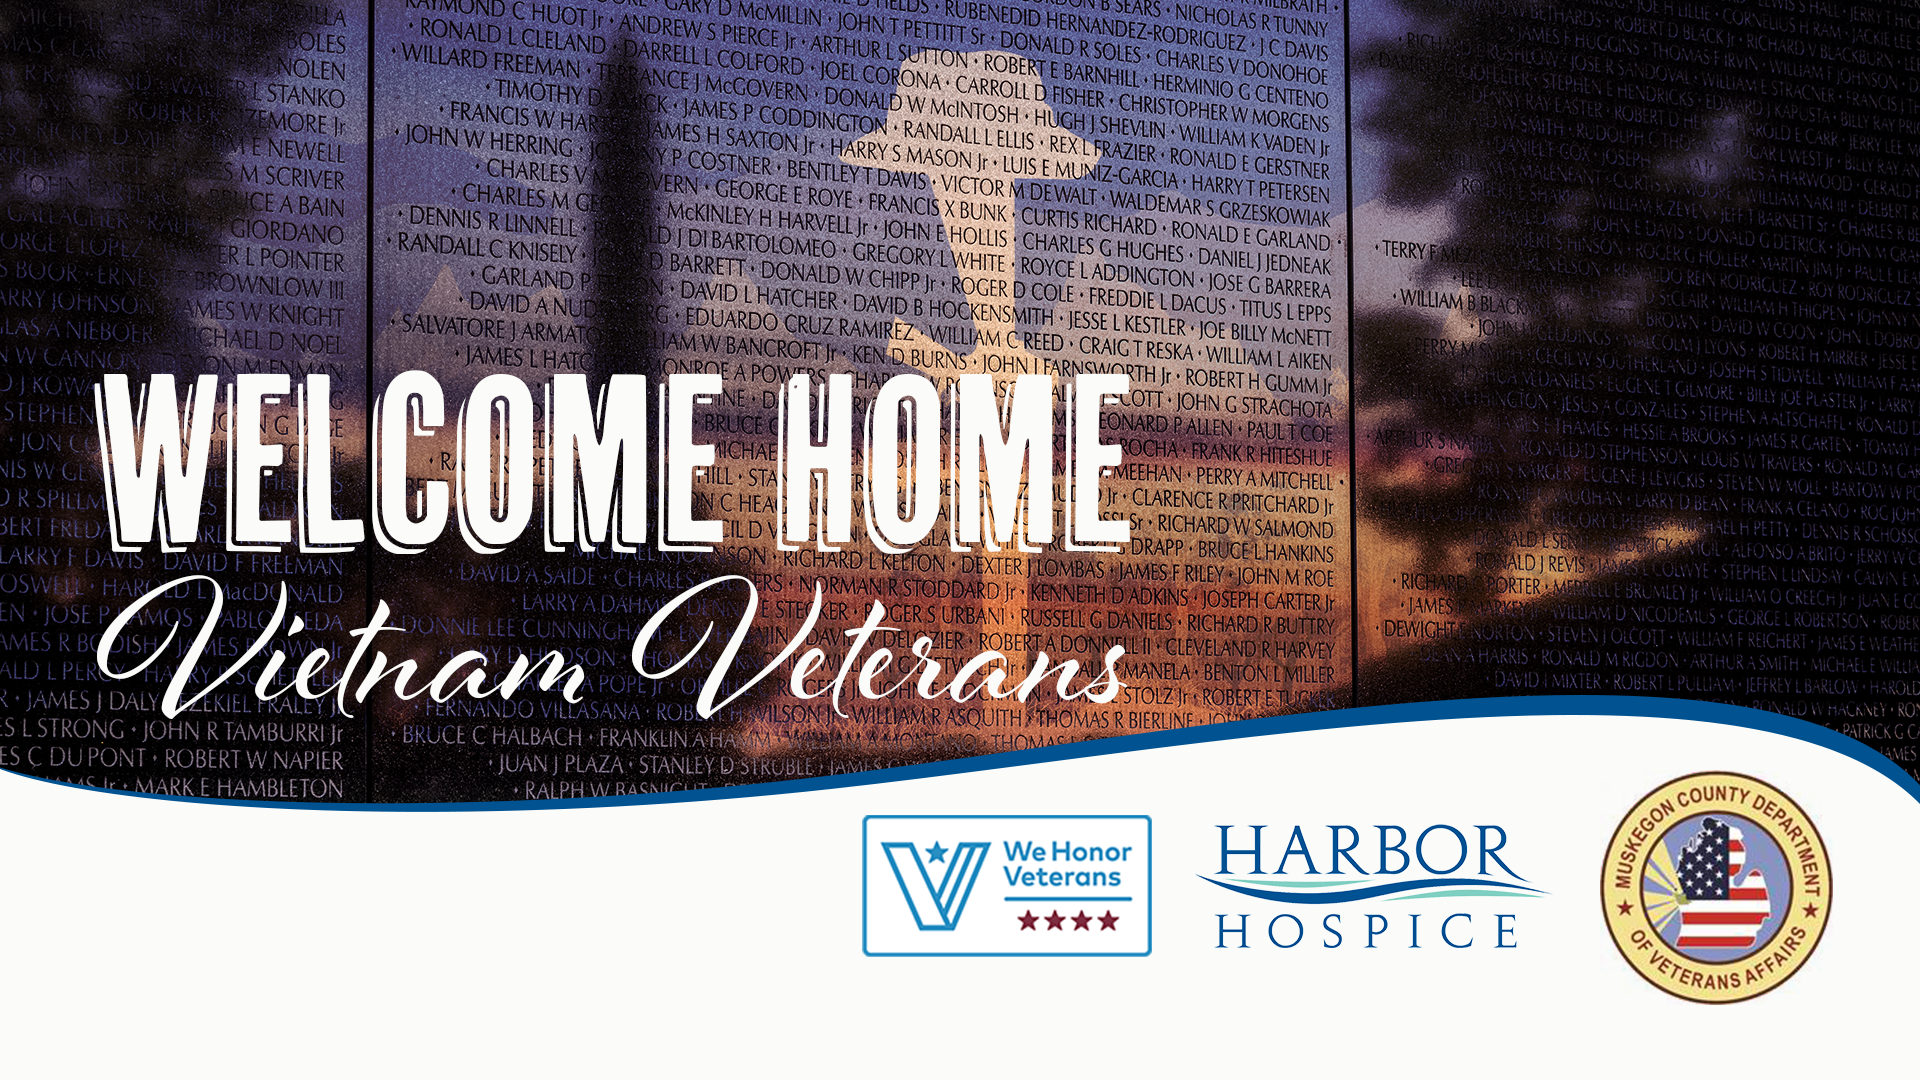 Welcome Home - Welcome Home Vietnam Veterans - A Community Event